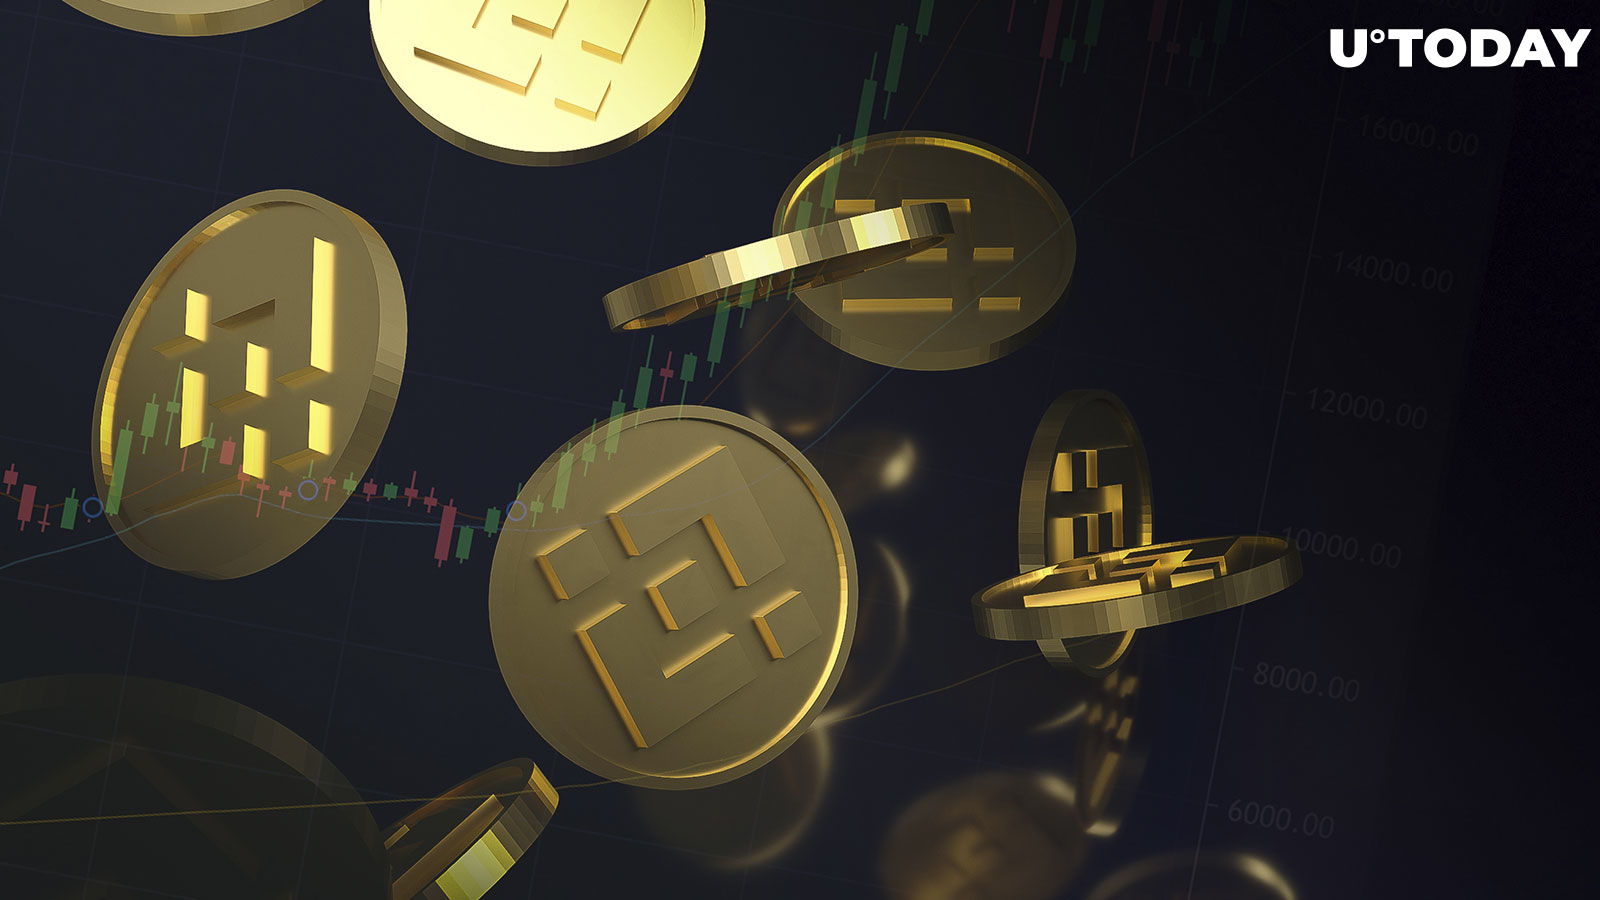 Binance's BUSD Controversy Prompts Calls for Decentralized Alternative